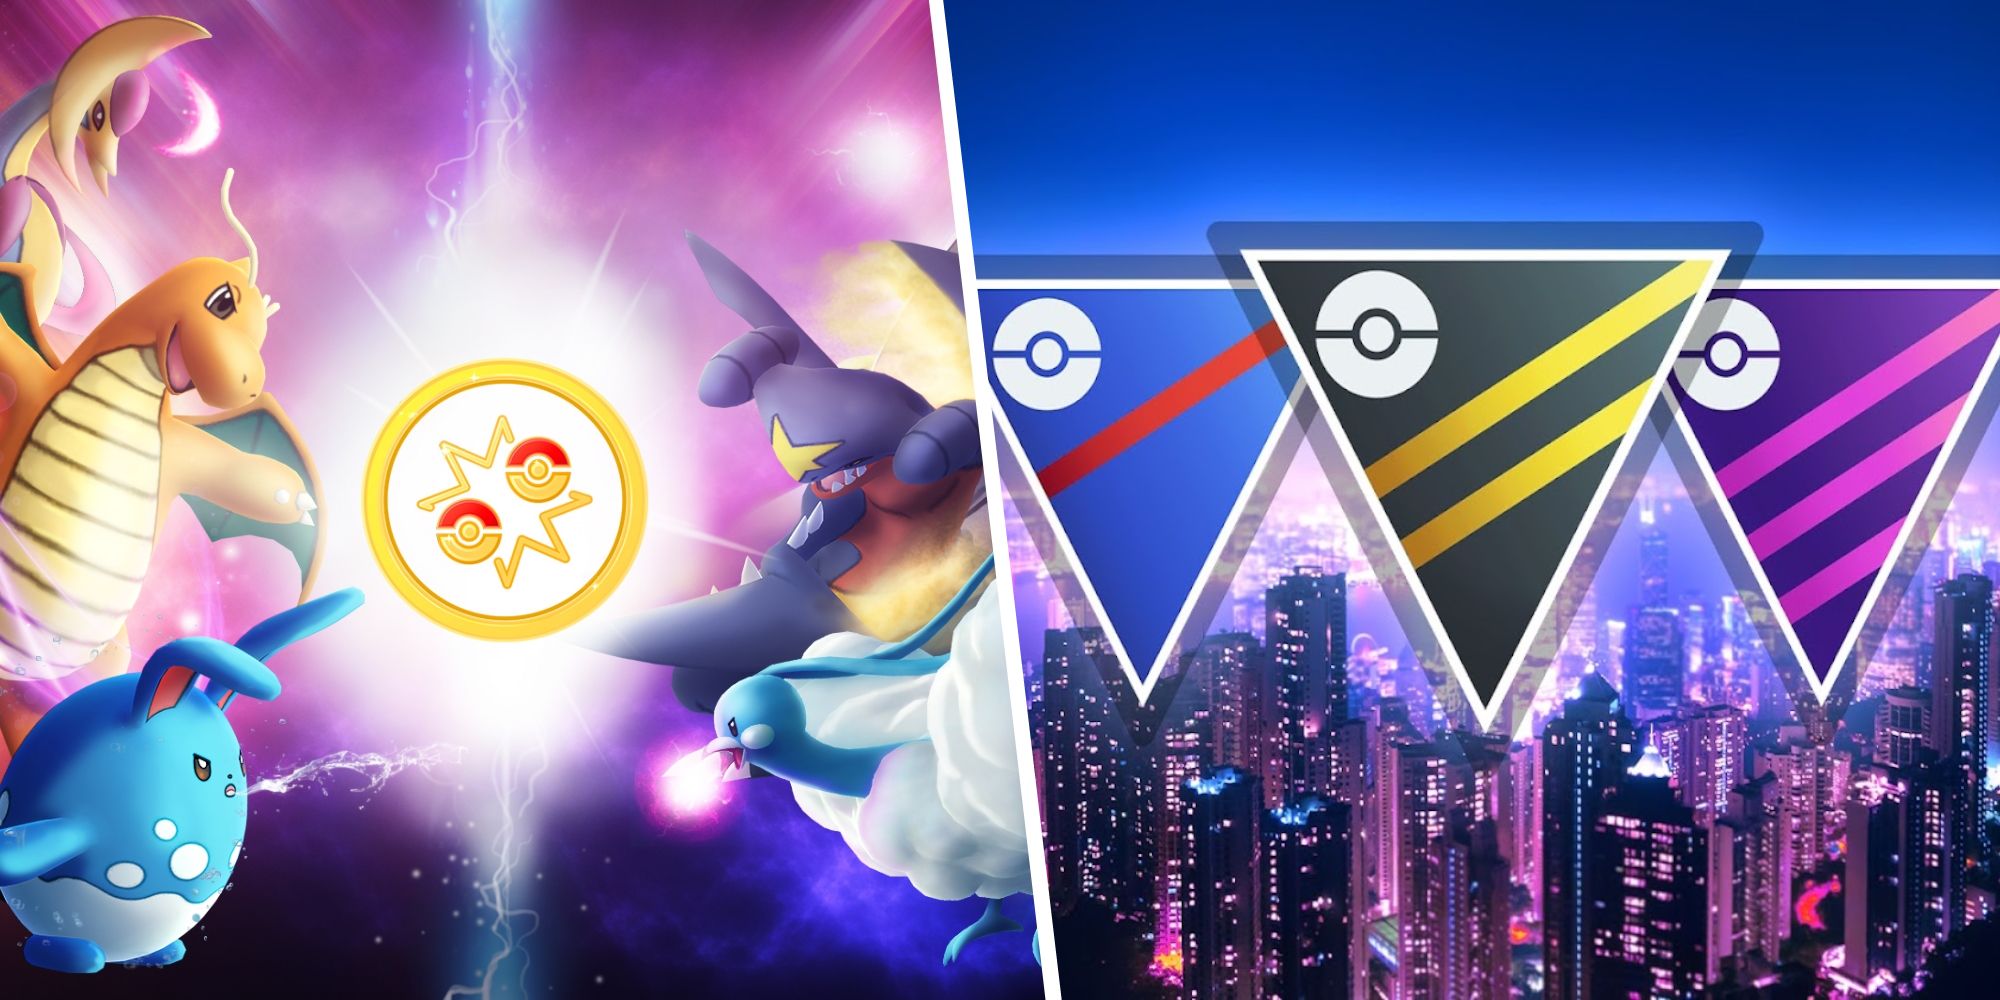 Image of five different Pokemon facing each other split with an image of three Go Battle League symbols